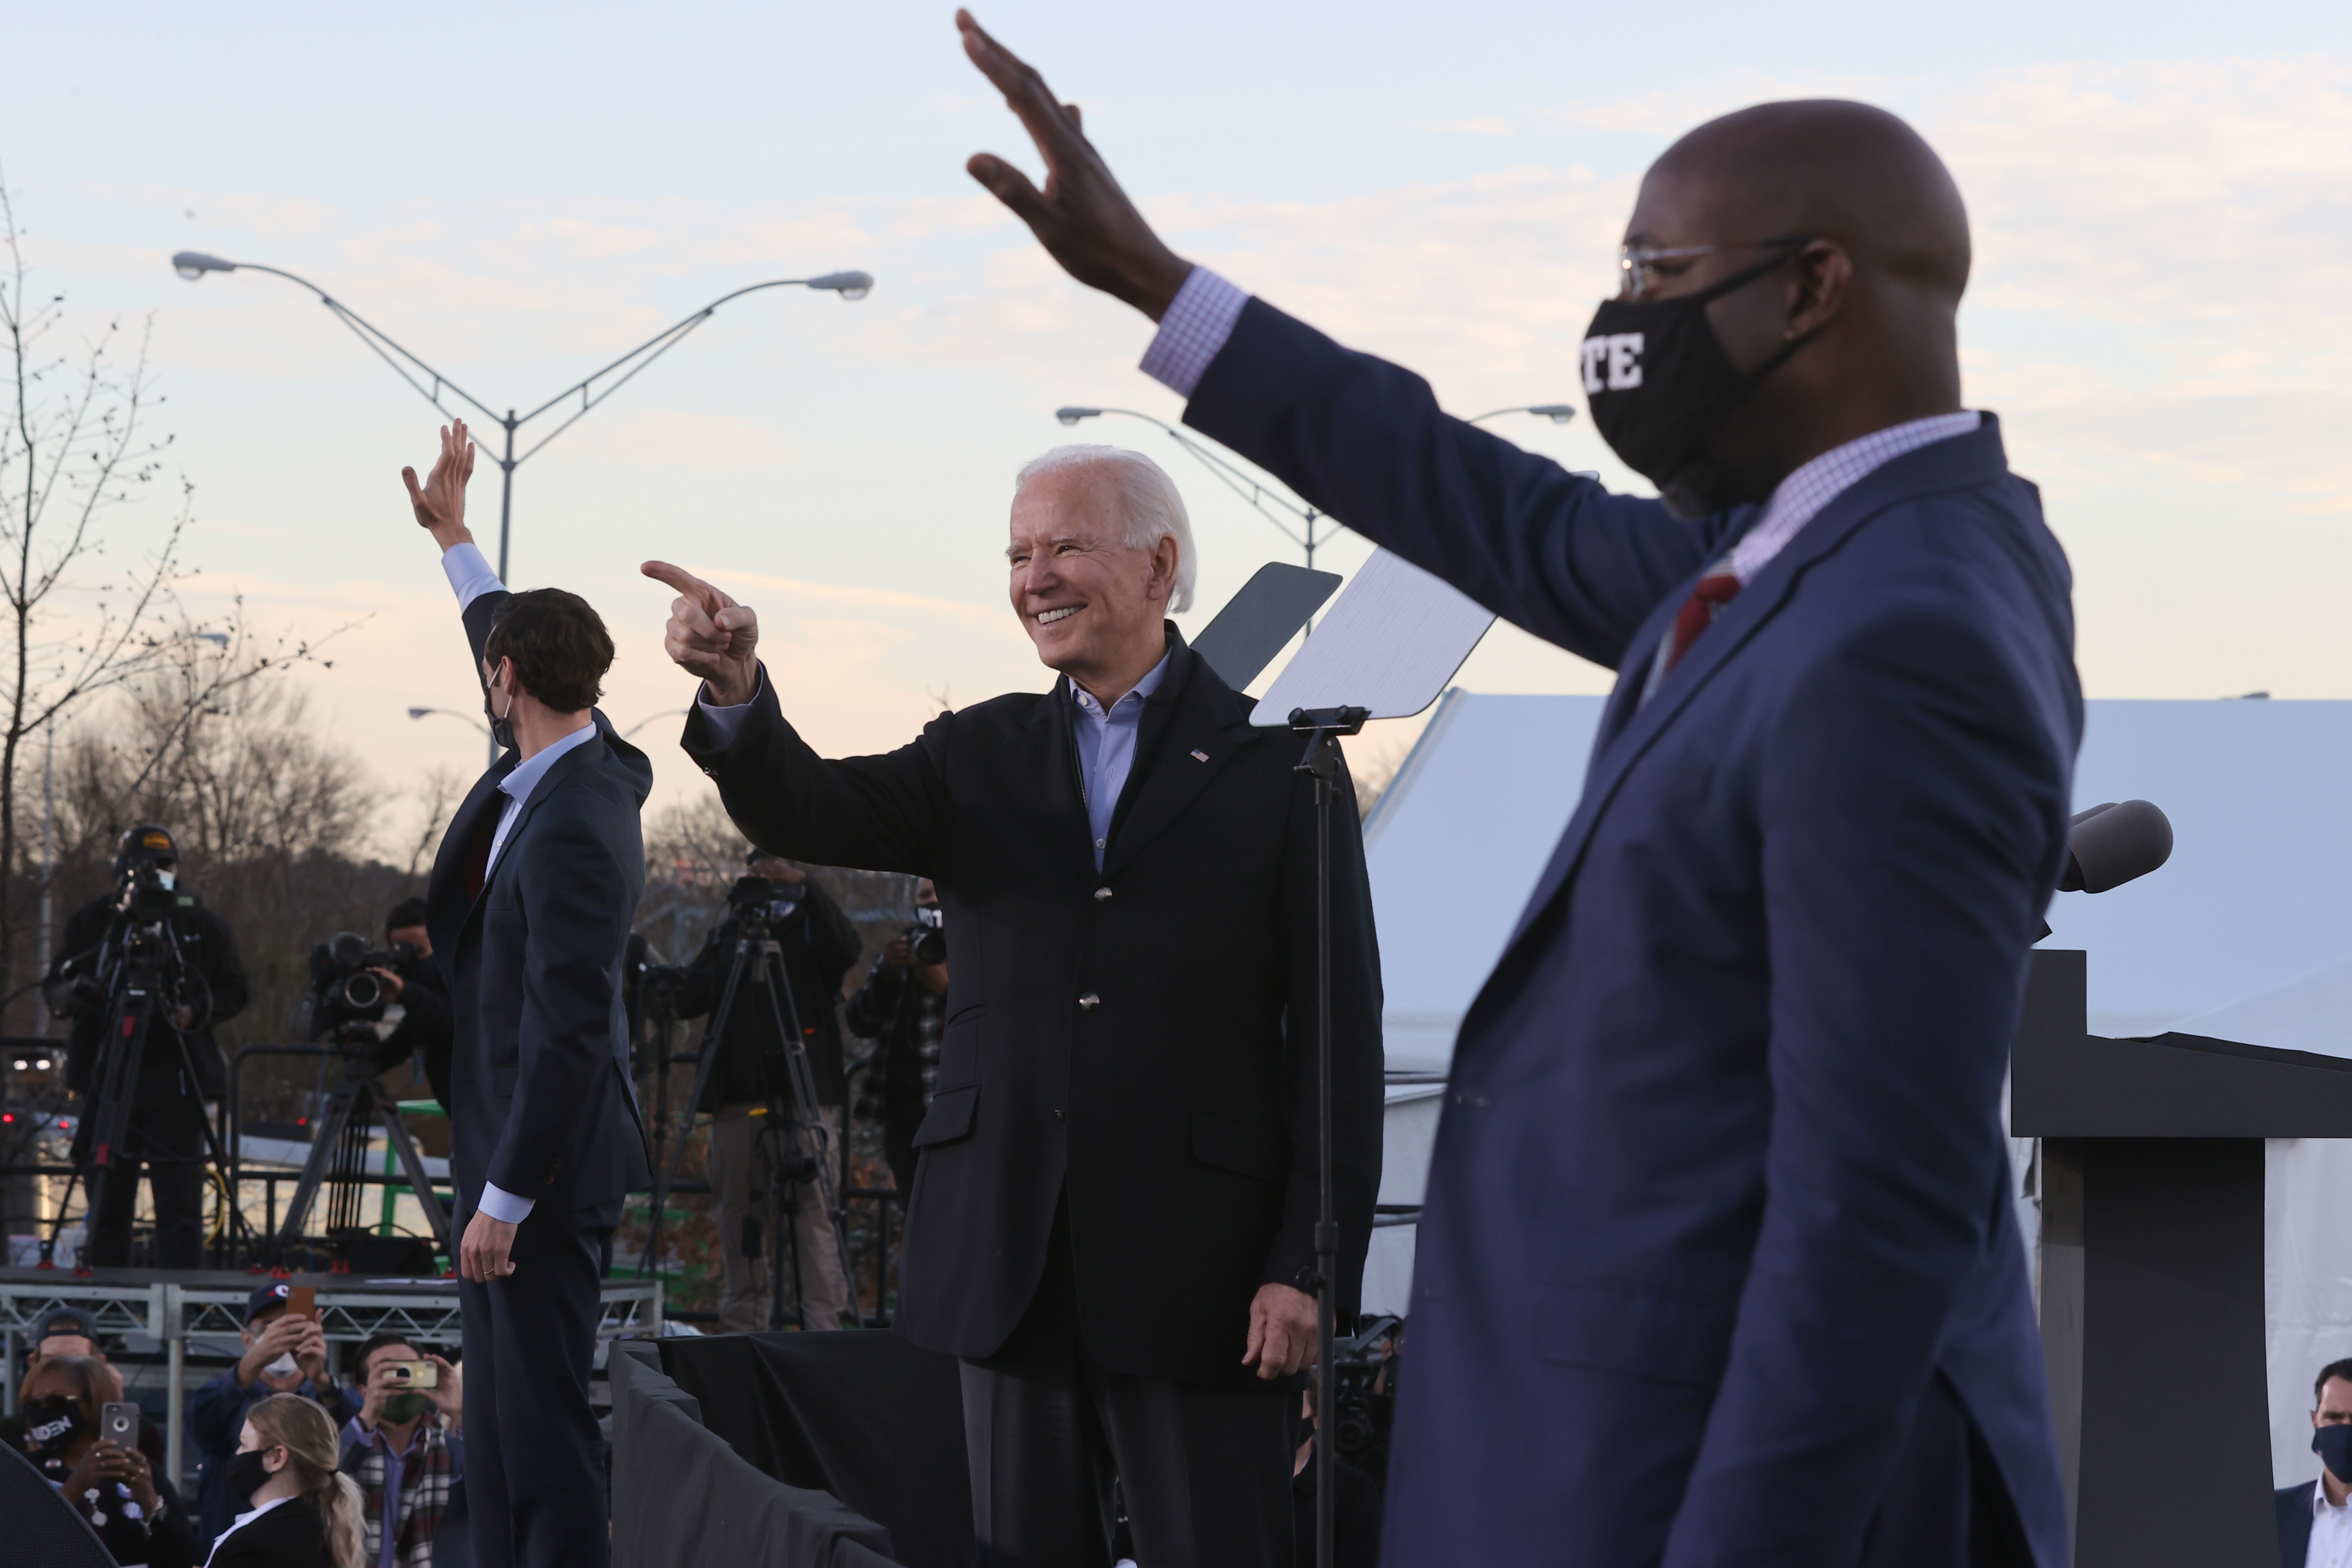 President-elect Joe Biden along with democratic candidates for the U.S. Senate Jon Ossoff and Rev. Raphael Warnock greet supporters during a campaign rally the day before their runoff election in the parking lot of Centerparc Stadium January 04, 2021 in Atlanta, Georgia.